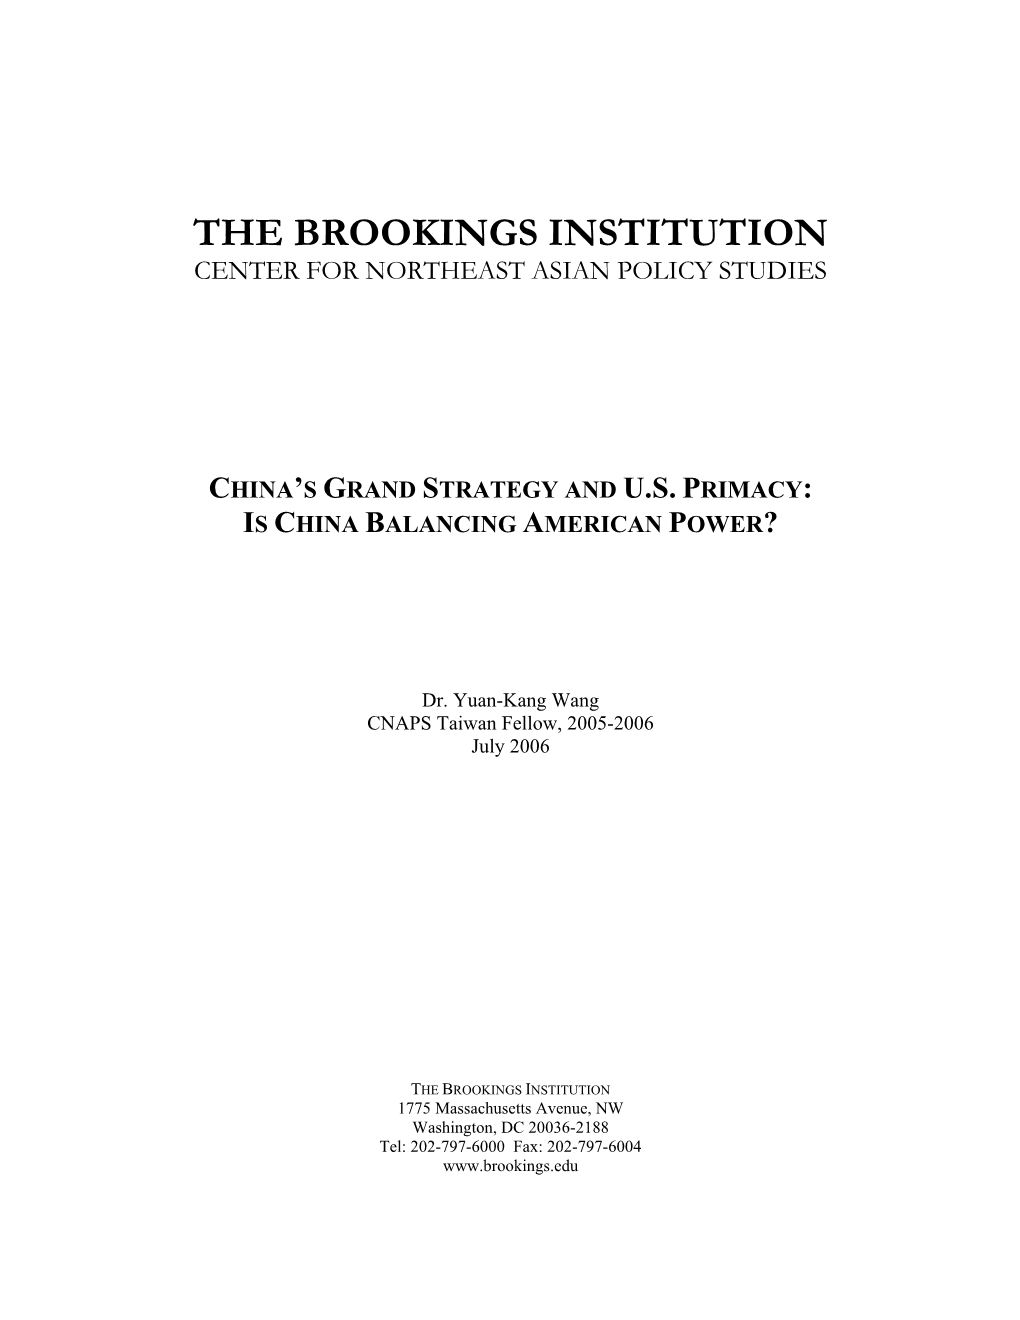 China's Grand Strategy and American Primacy